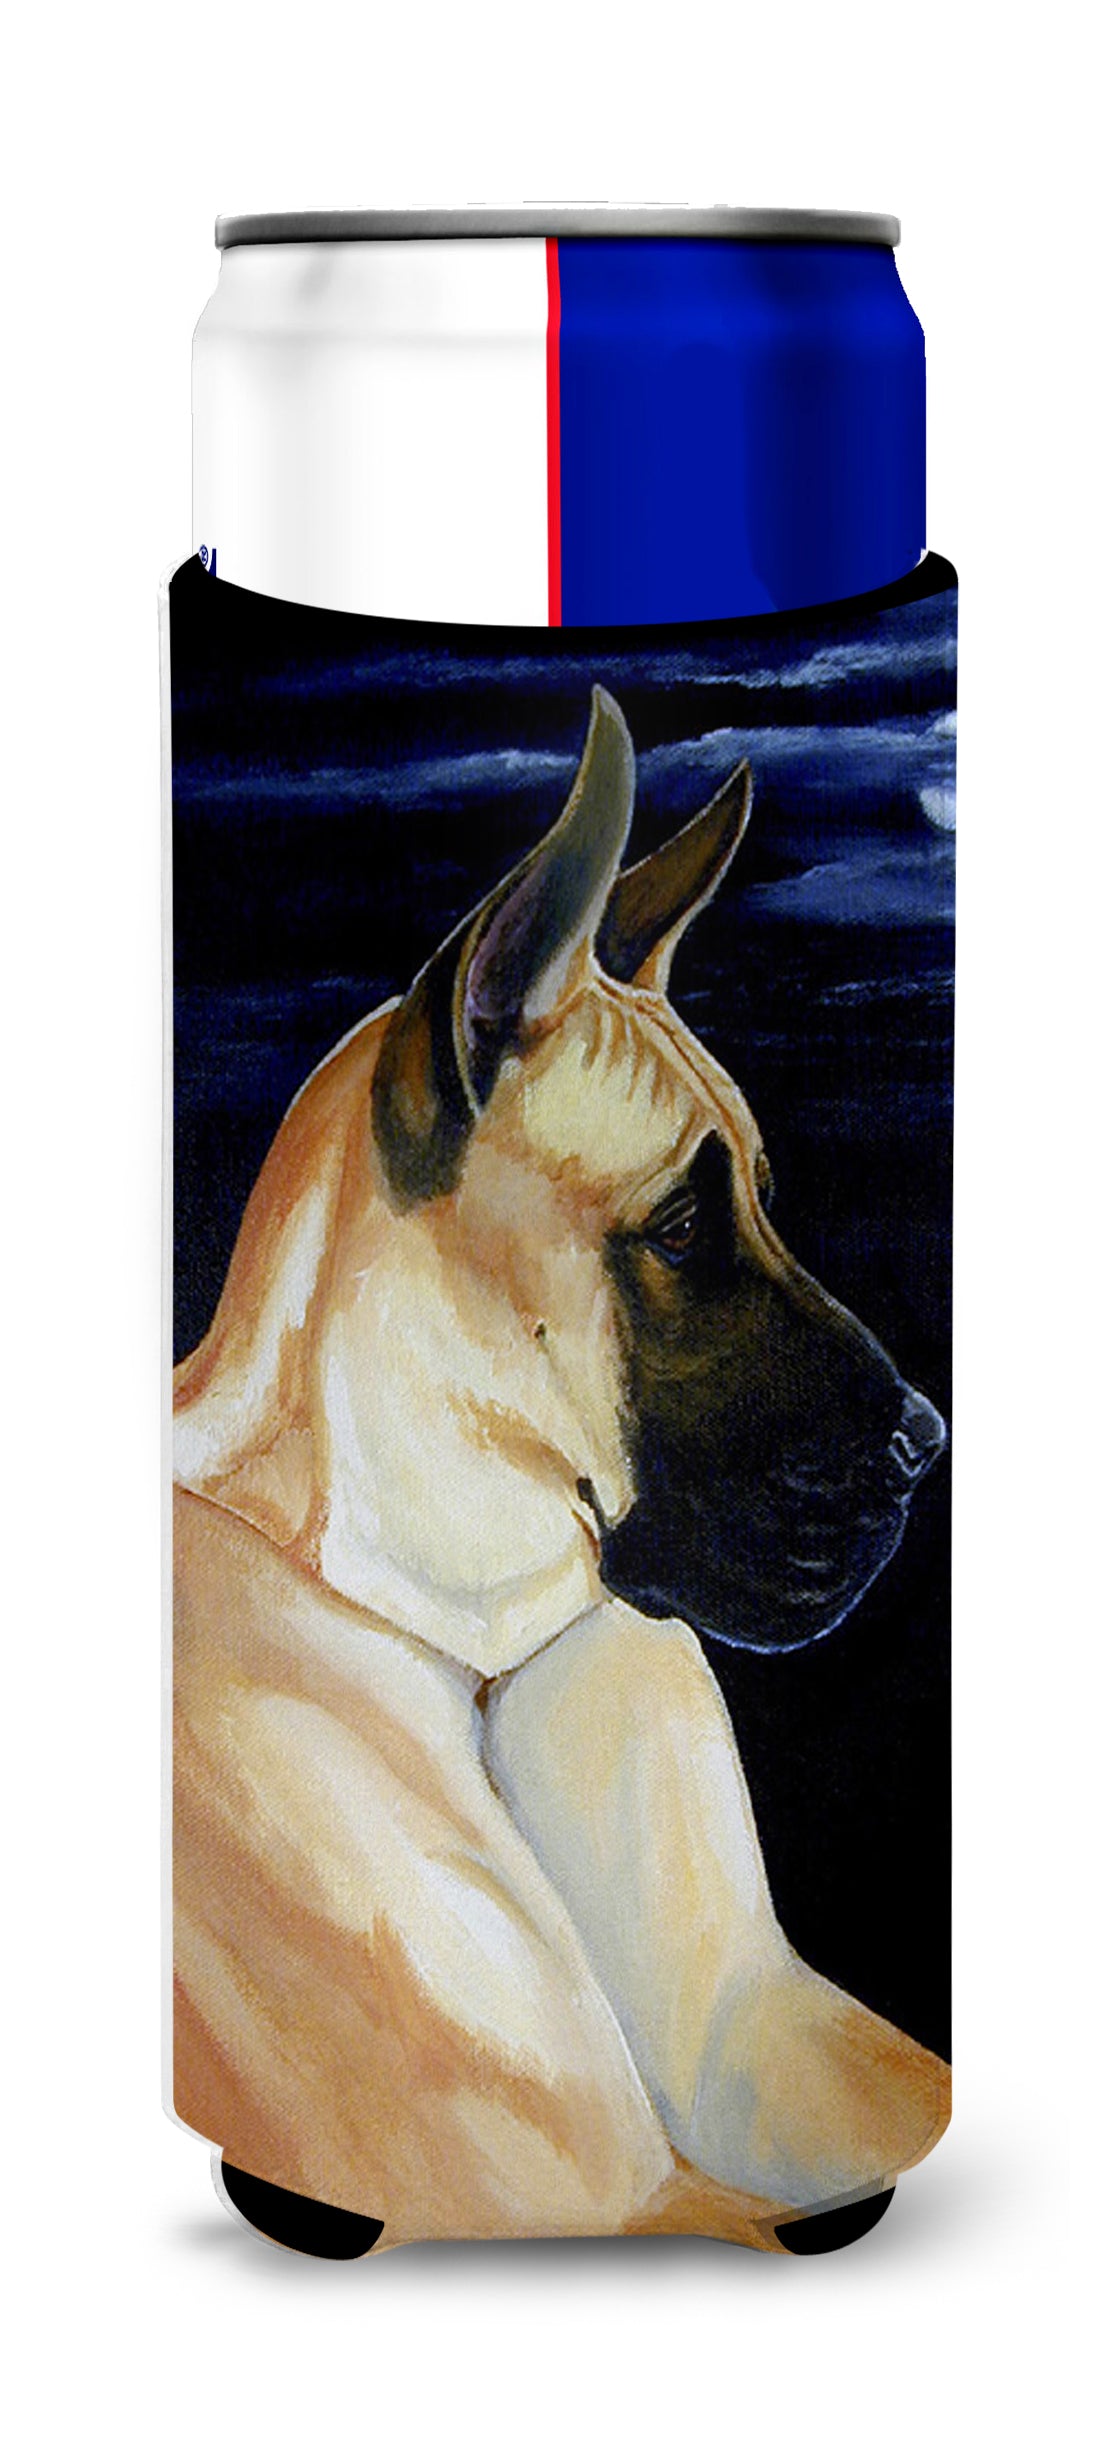 Fawn Great Dane in the Moonlight Ultra Beverage Insulators for slim cans 7059MUK.